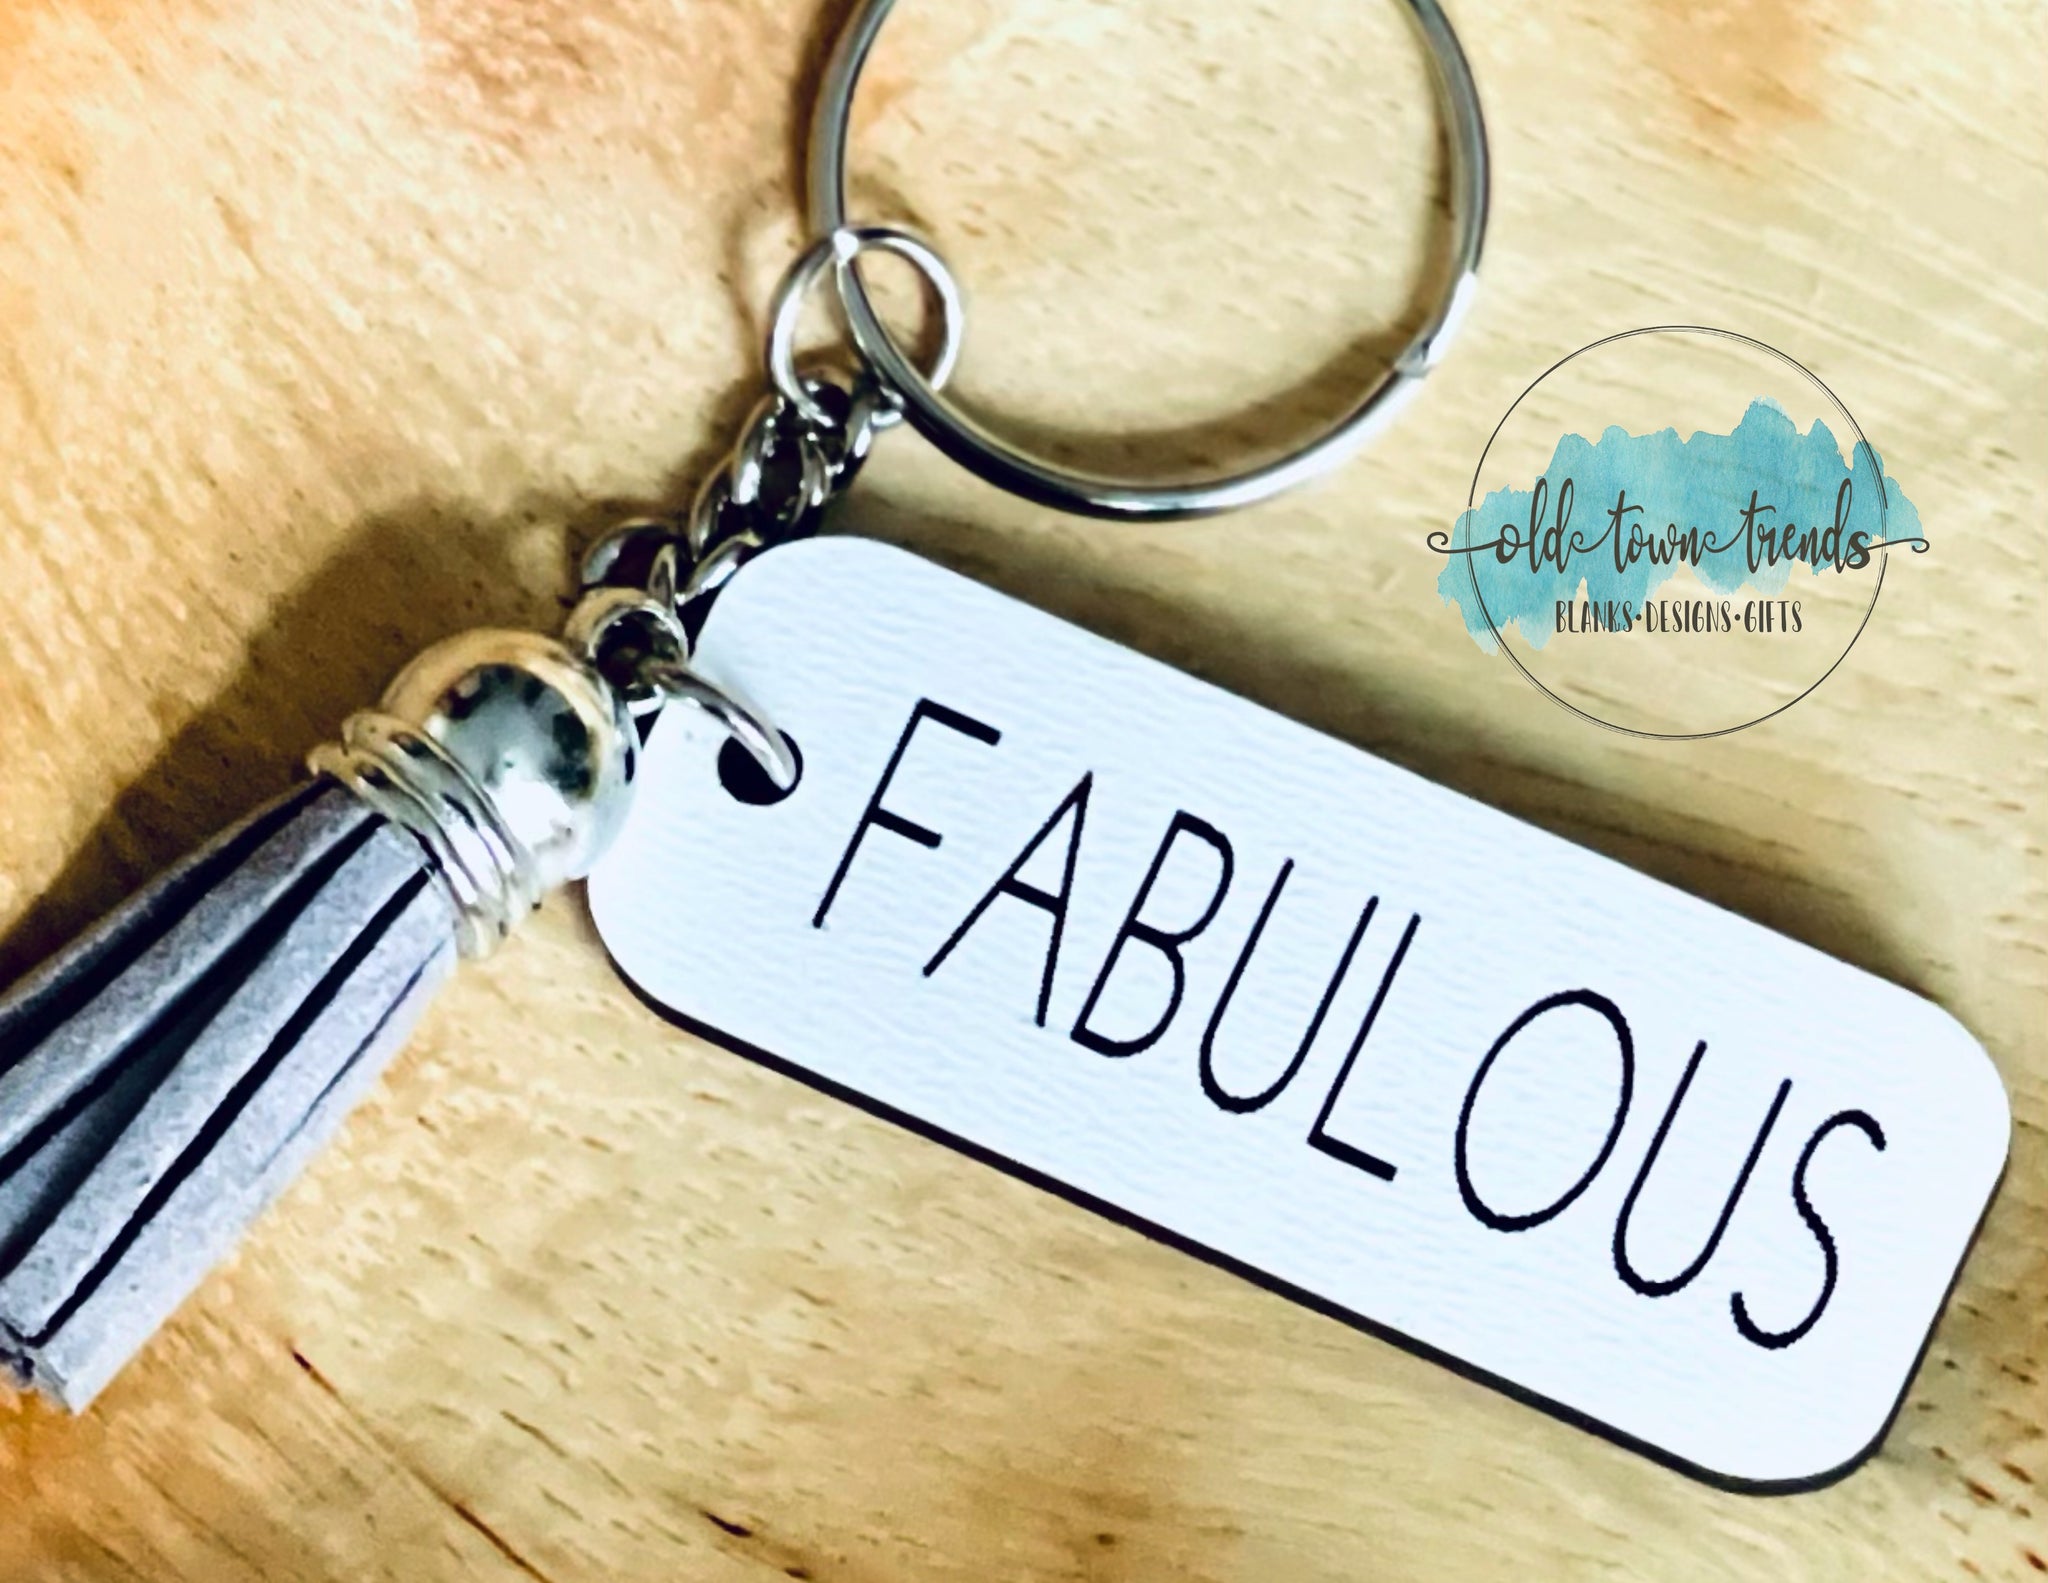 OldTownTrends Positive Sayings Keychain Set, Set 1 Groovy Words, Positive Vibes, Glowforge Ready, Laser Cut File, SVG